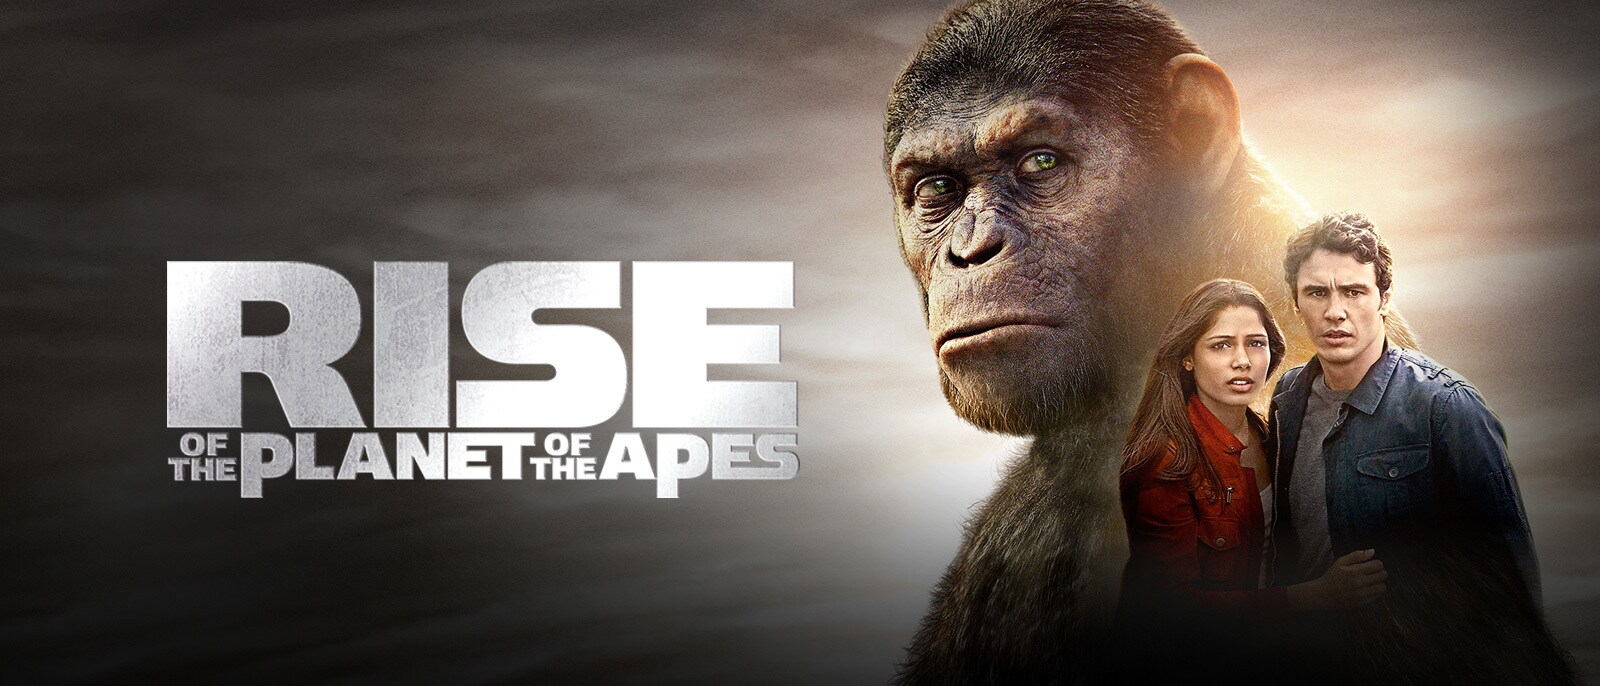 rise of the planet of the apes cast